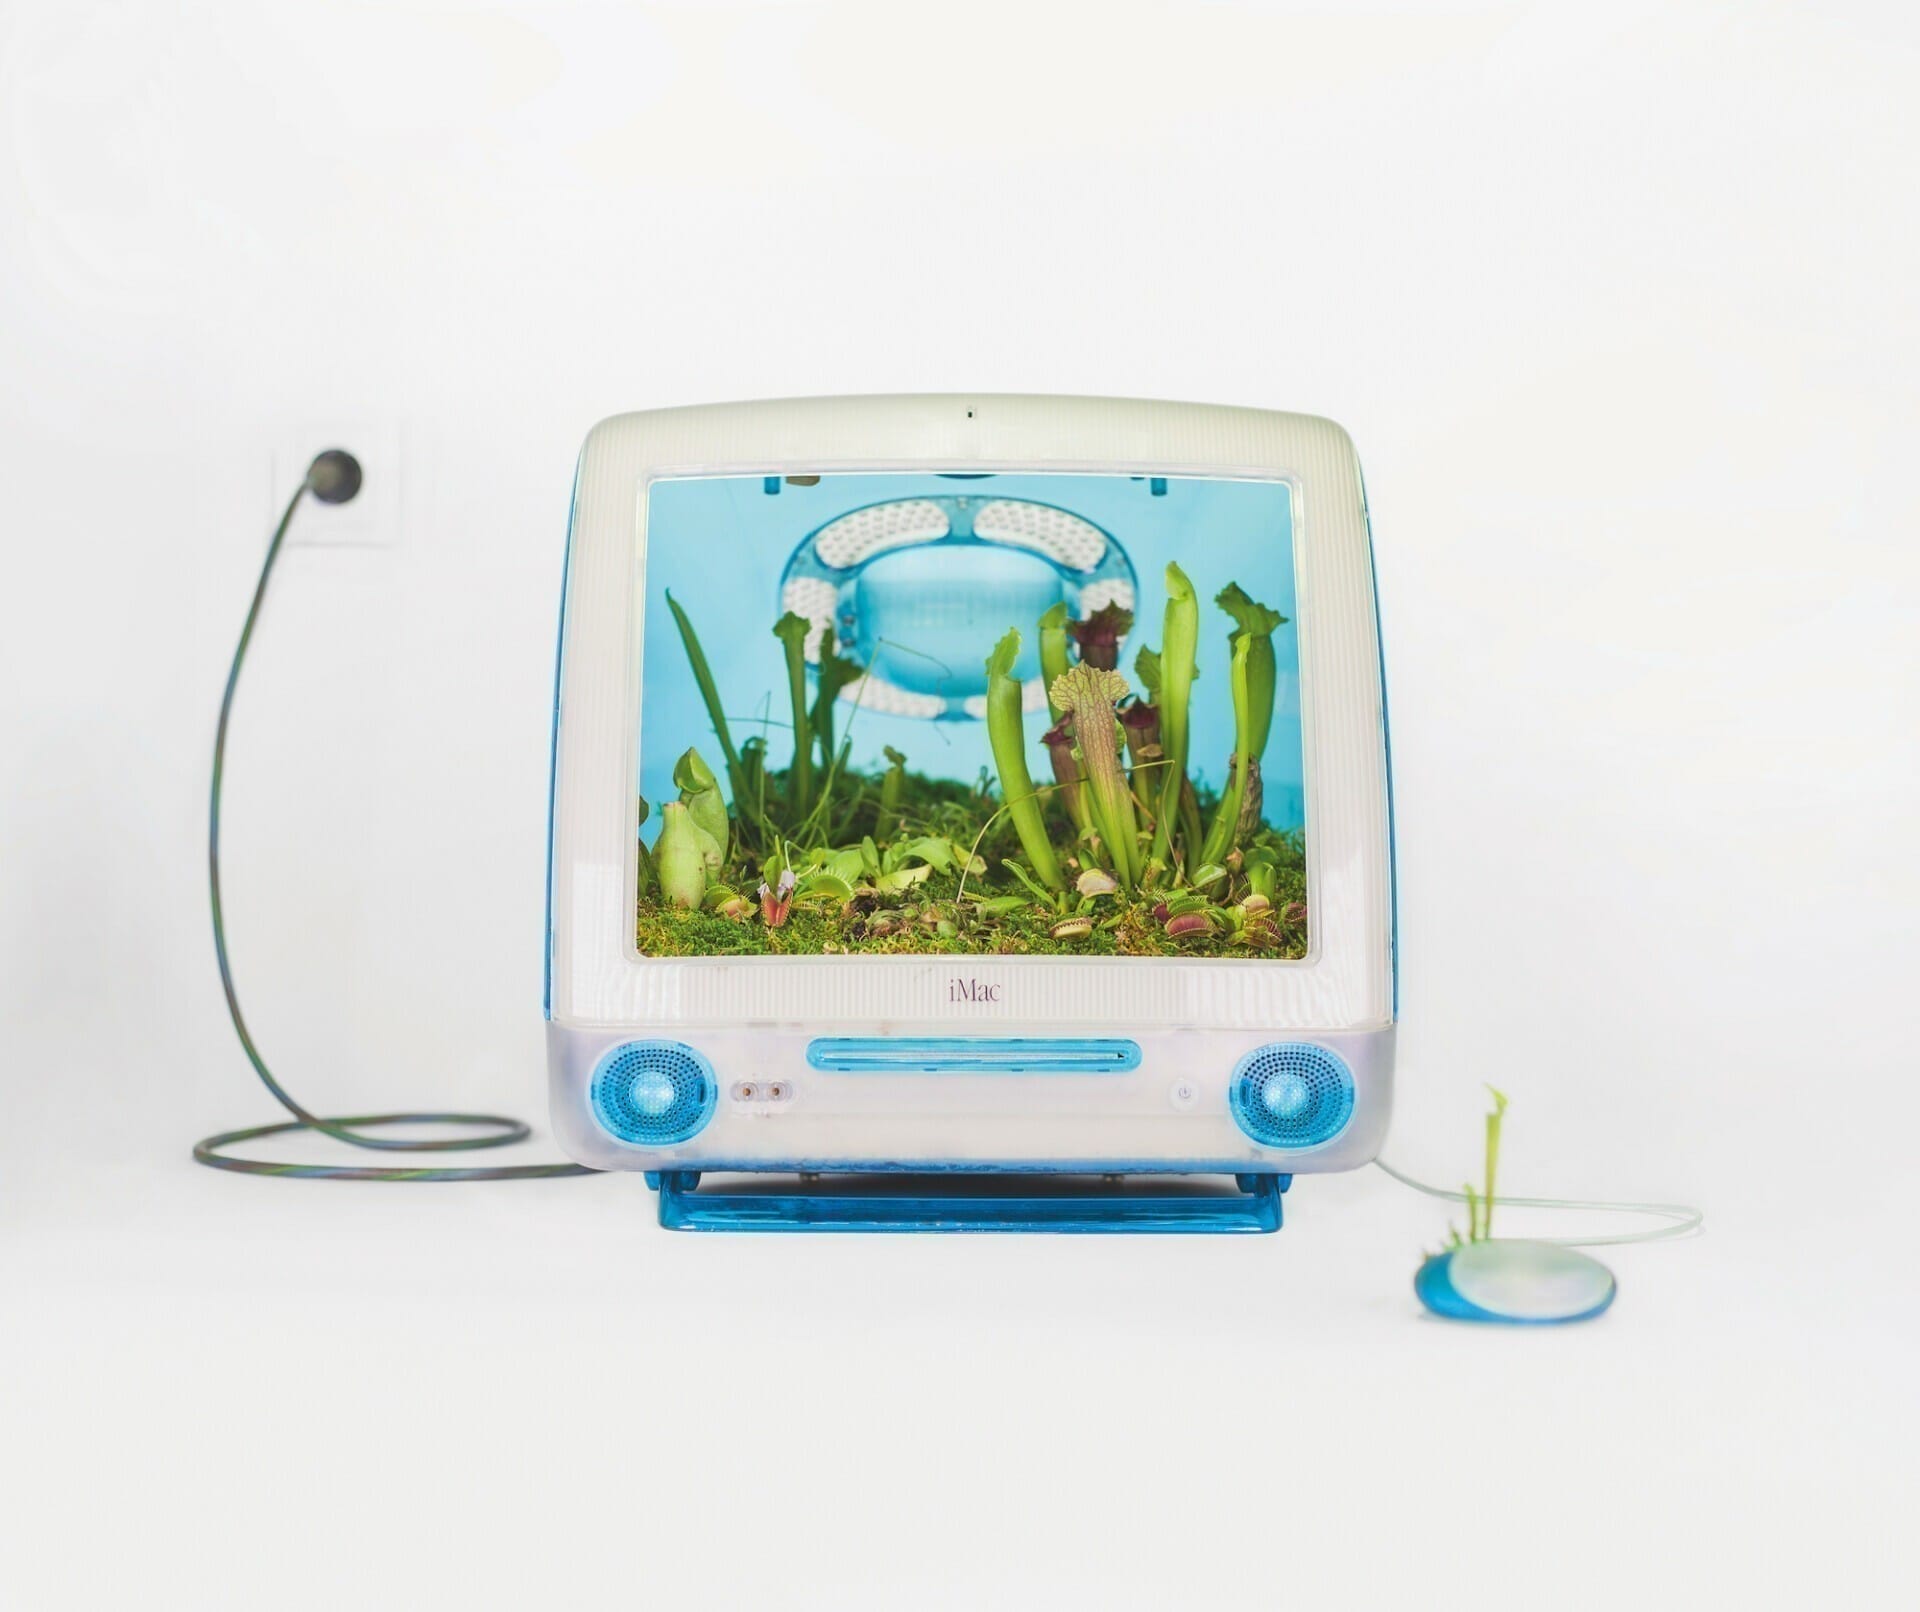 Christophe Guinet (Monsieur Plant), “Plant Your Mac!” (2020), mixed media, 23 5/8 × 12 5/8 inches. Image © the artist